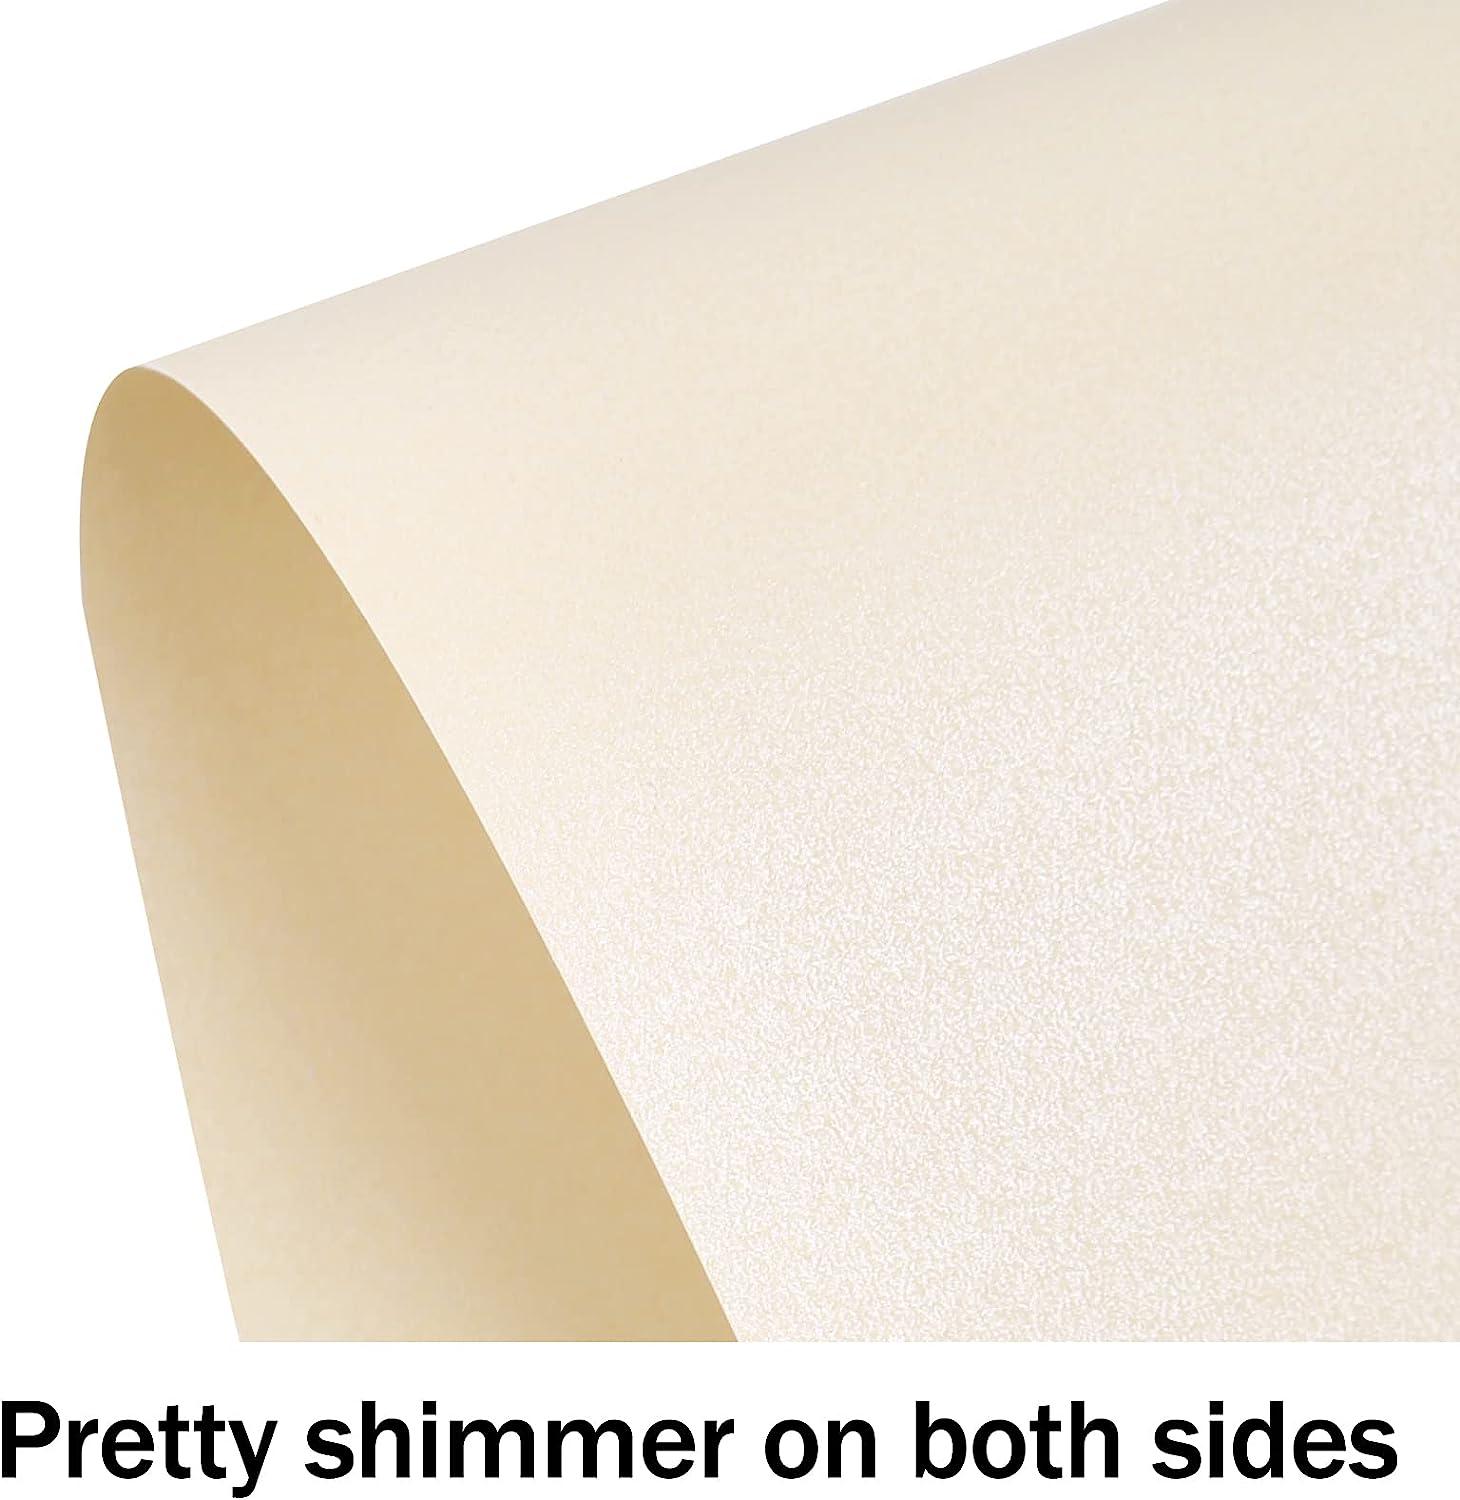 100 Sheets Cream Shimmer Cardstock 8.5 x 11 Metallic Paper Goefun 80lb Card  Stock Printer Paper for Invitations Certificates Crafts Card Making cream  shimmer 8.5x11